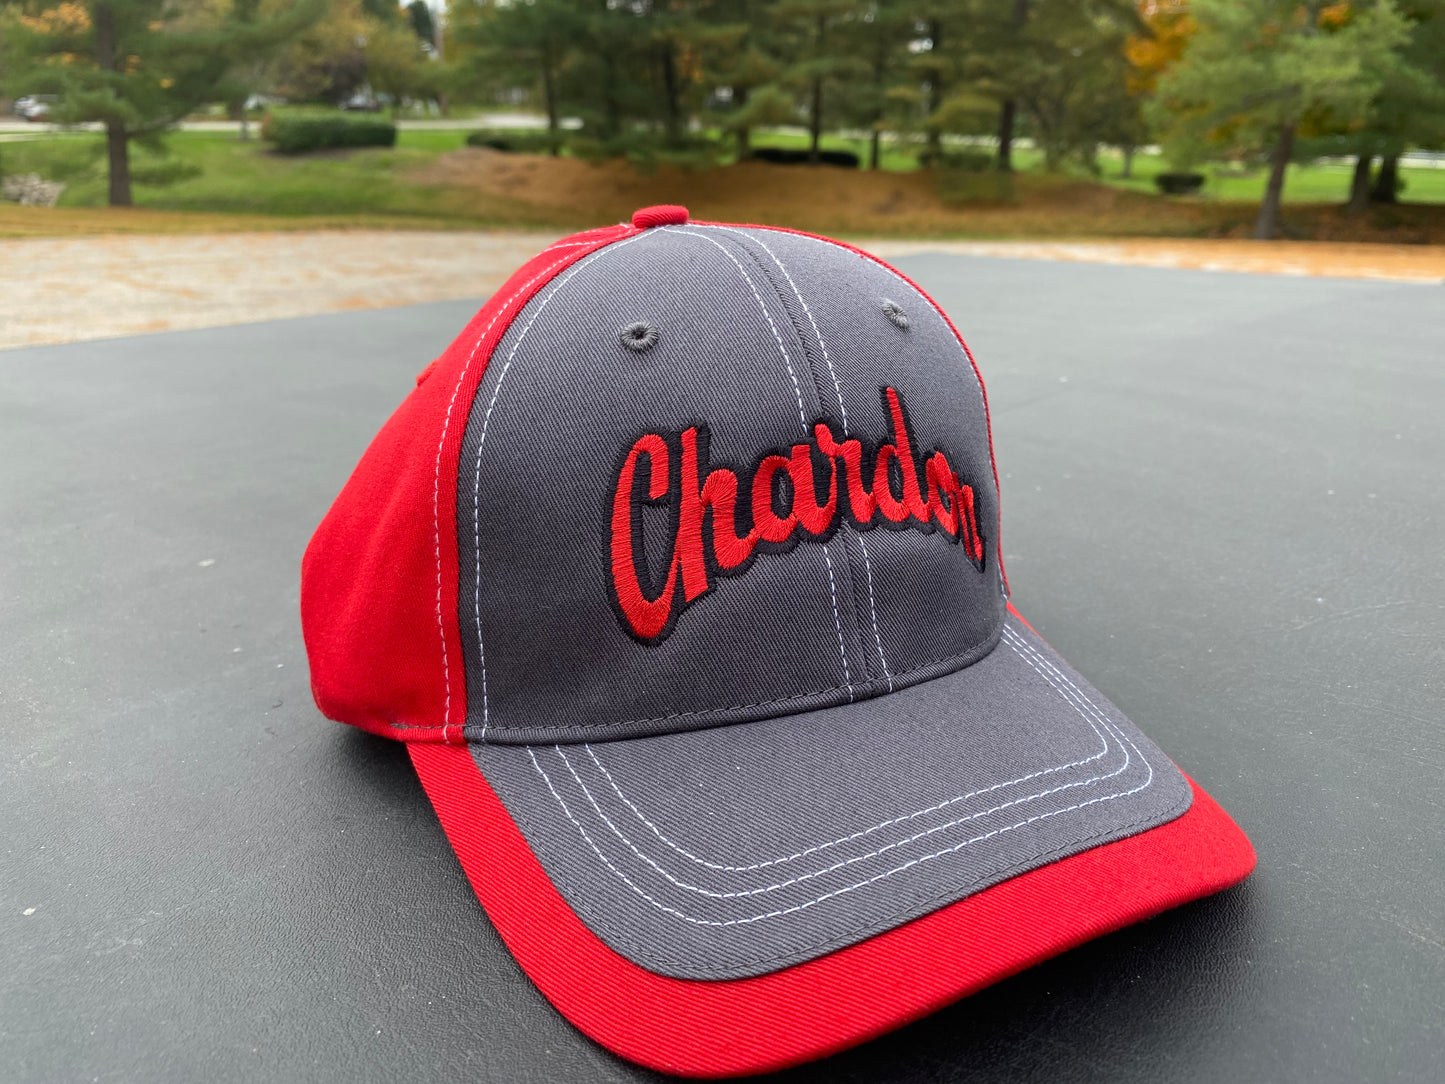 Embroidered Chardon Charcol/Red Cap